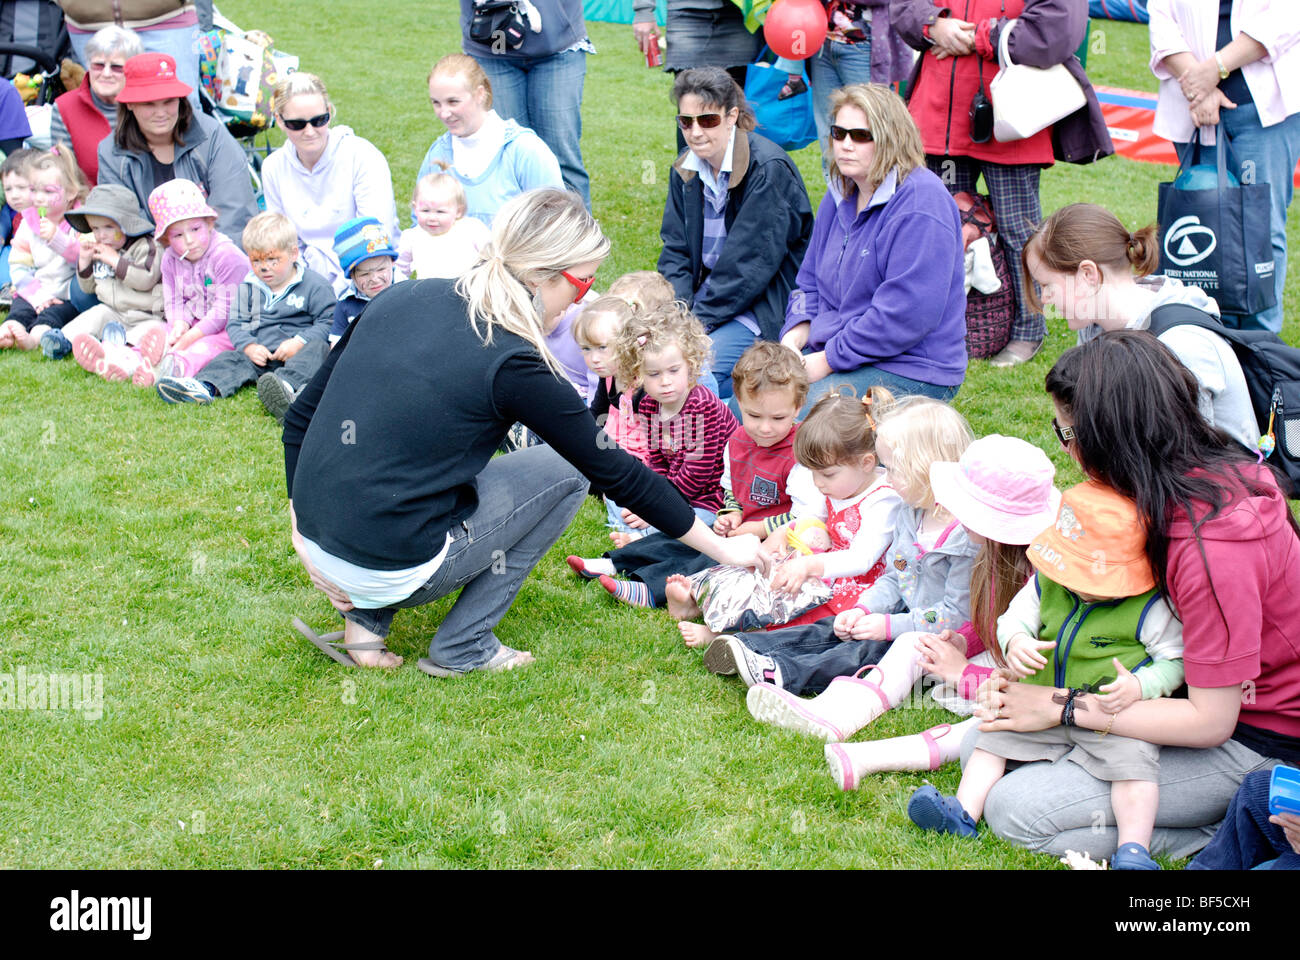 Young children and parents at a community event. Stock Photo